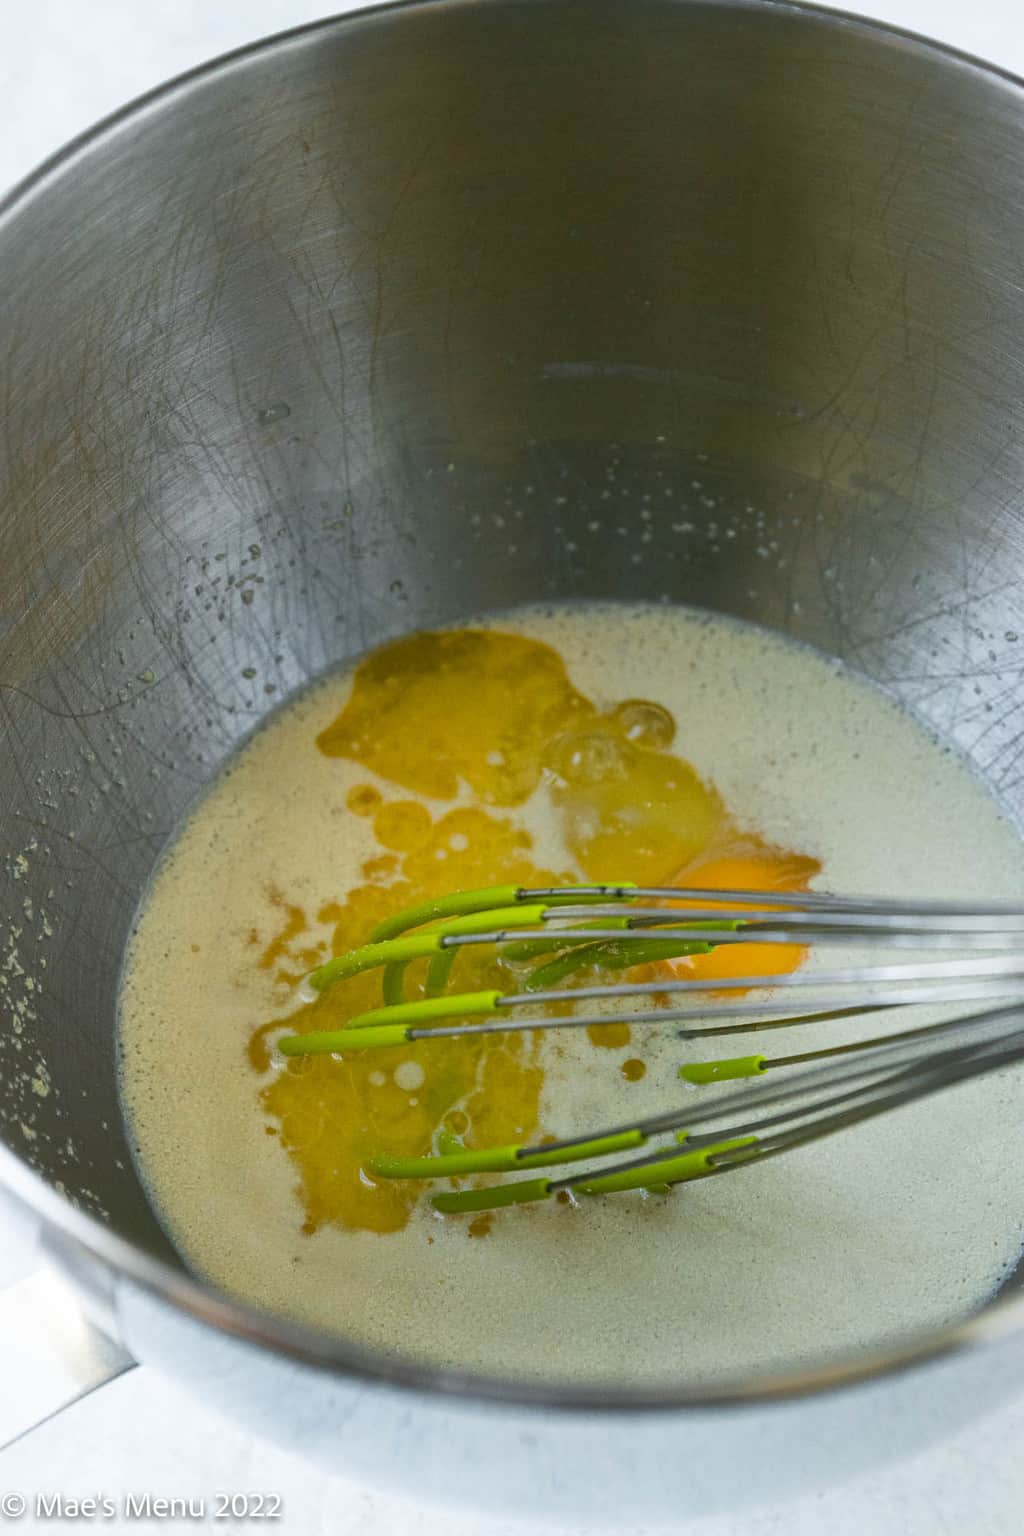 A mixing bowl with milk, yeast, butter, and eggs.